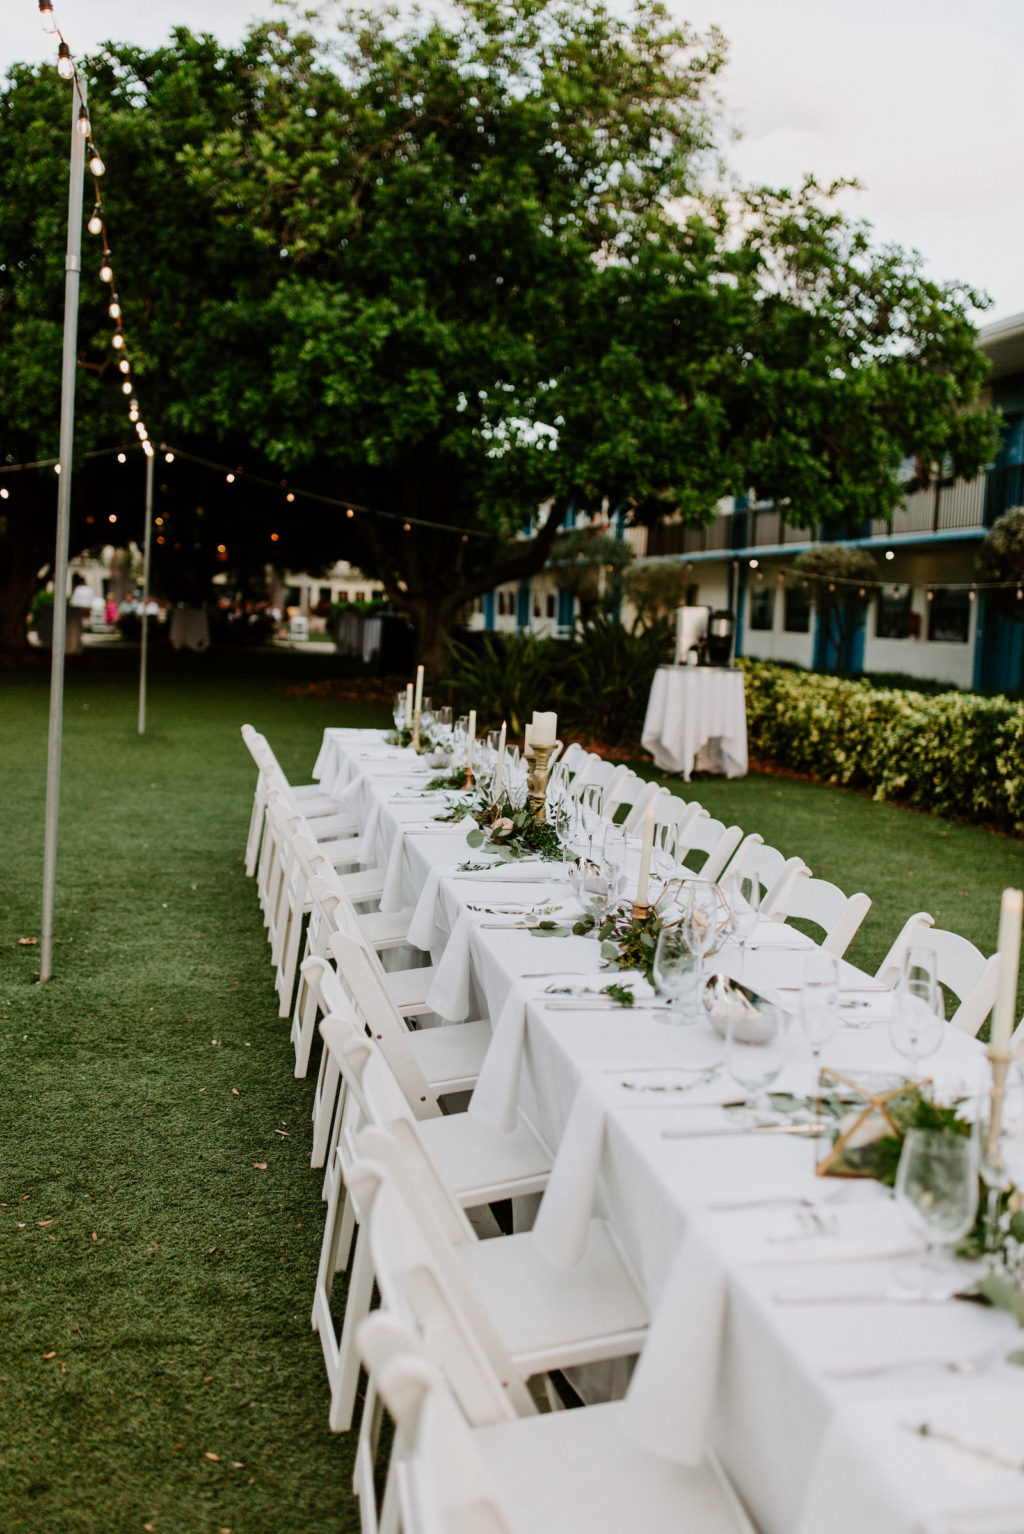 Garden Tropical Wedding Reception Decor, Long Feasting Table with White Linens, Greenery Floral Centerpieces, Candlesticks | St. Pete Wedding Venue Postcard Inn on the Beach